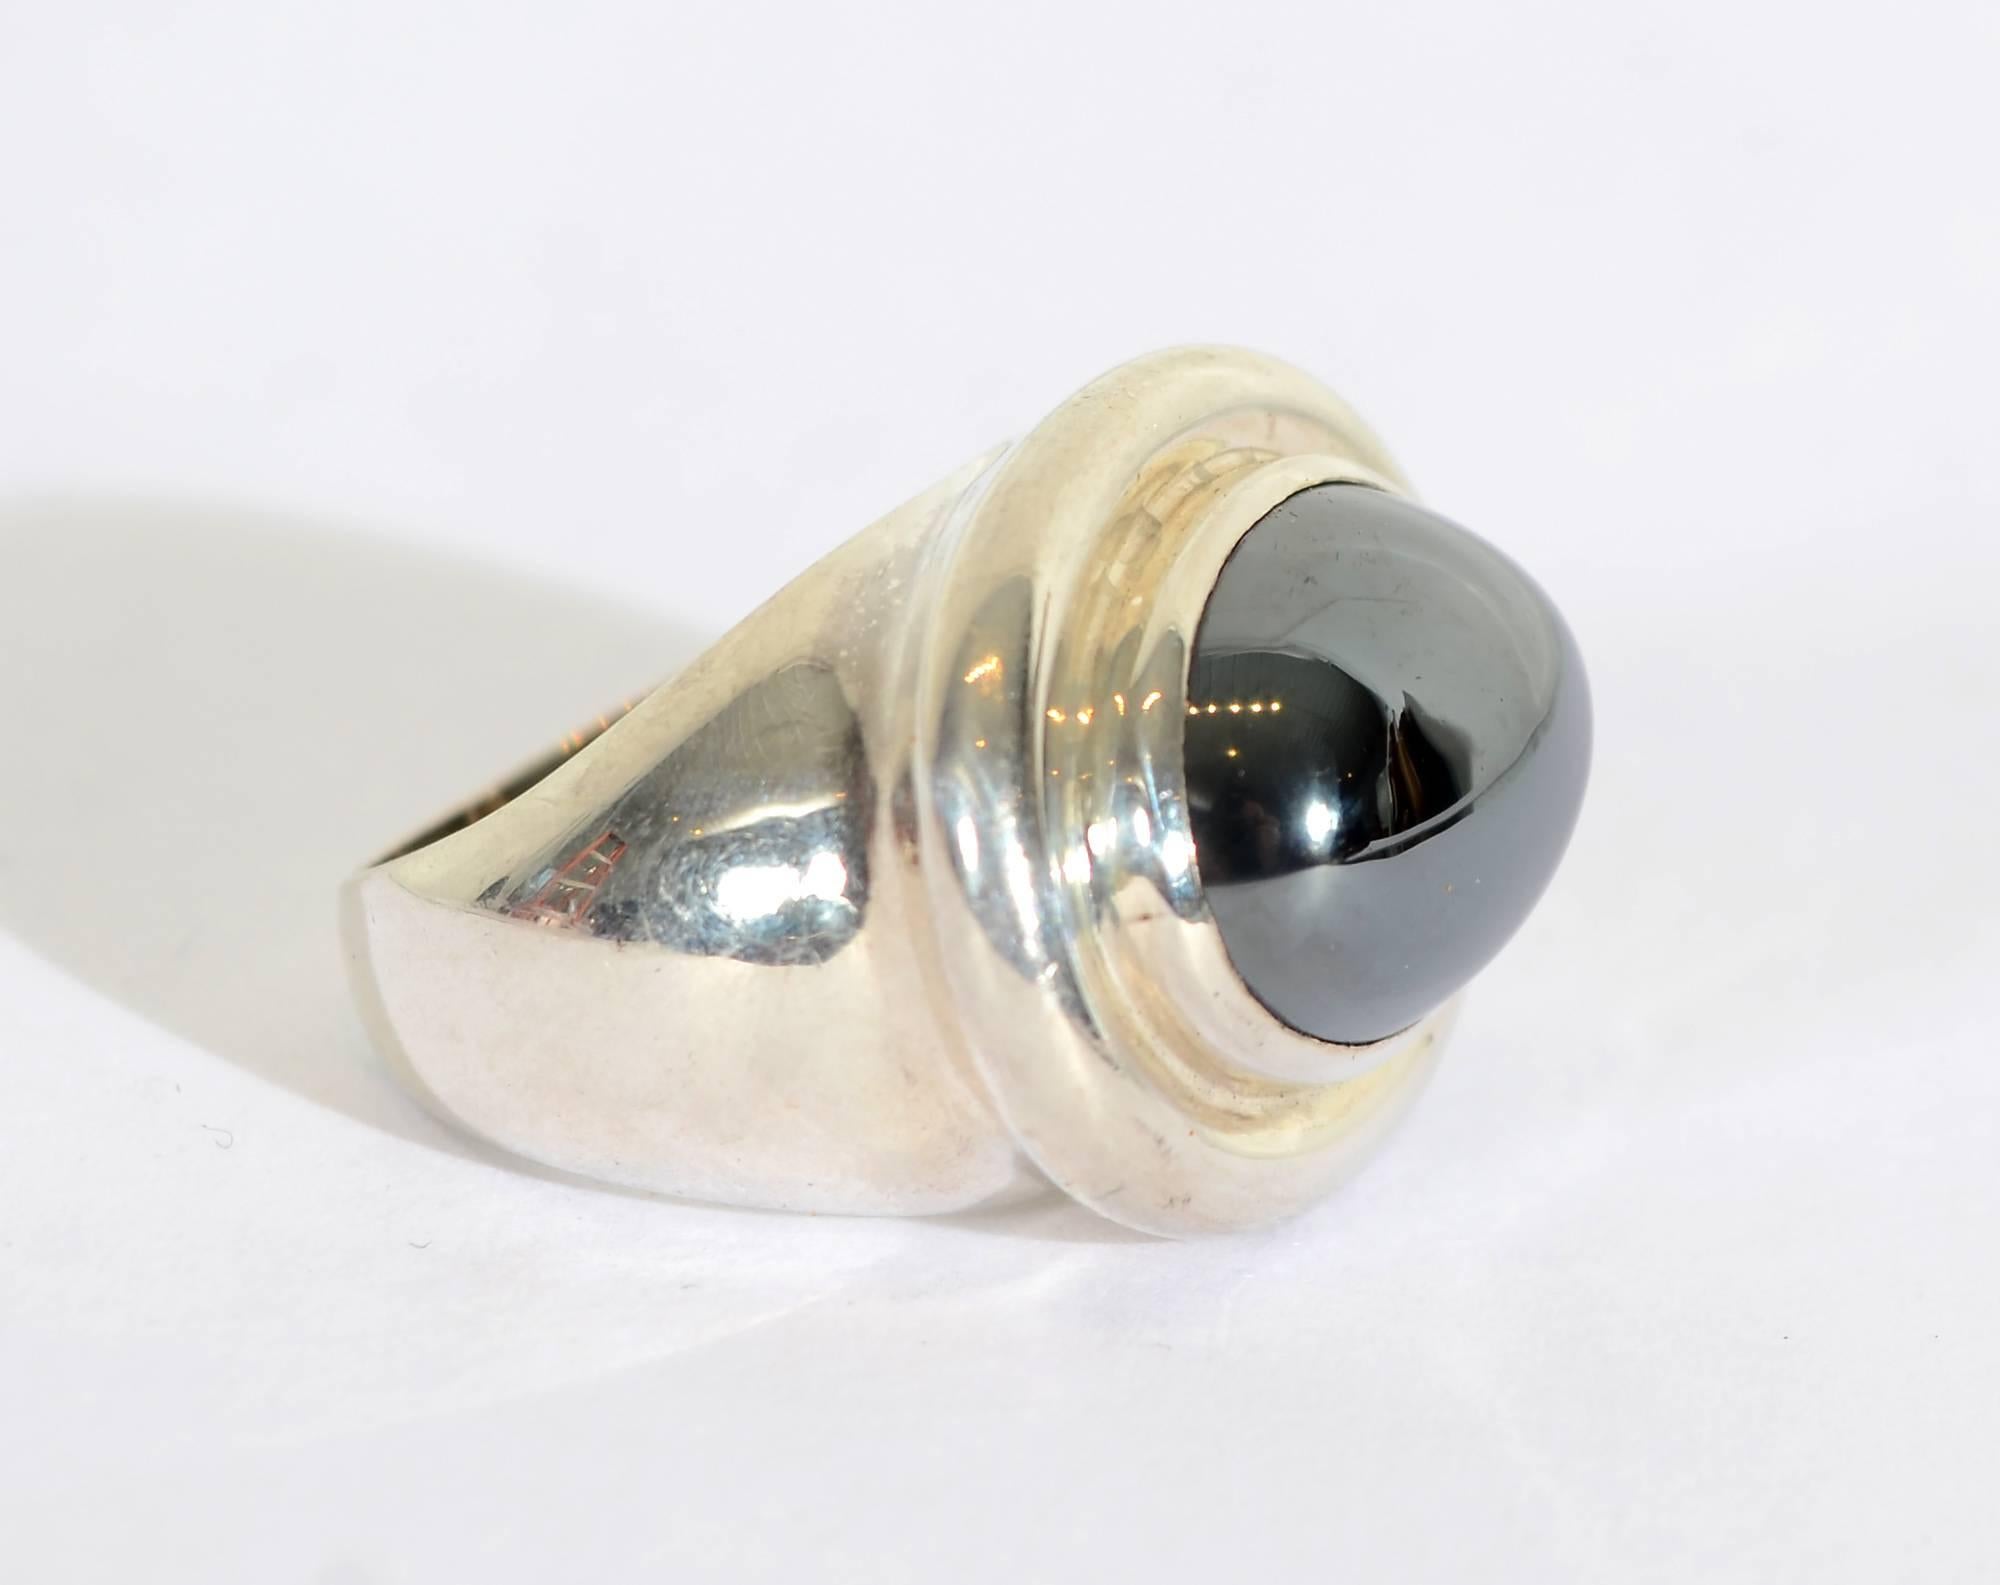 Streamlined and bold sterling and hematite ring by Paloma Picasso for Tiffany. The hematite is gray/black in color. The matching earrings are dated 1985 so I assume these are of the same period. They are available as item LU1332282753. The ring is